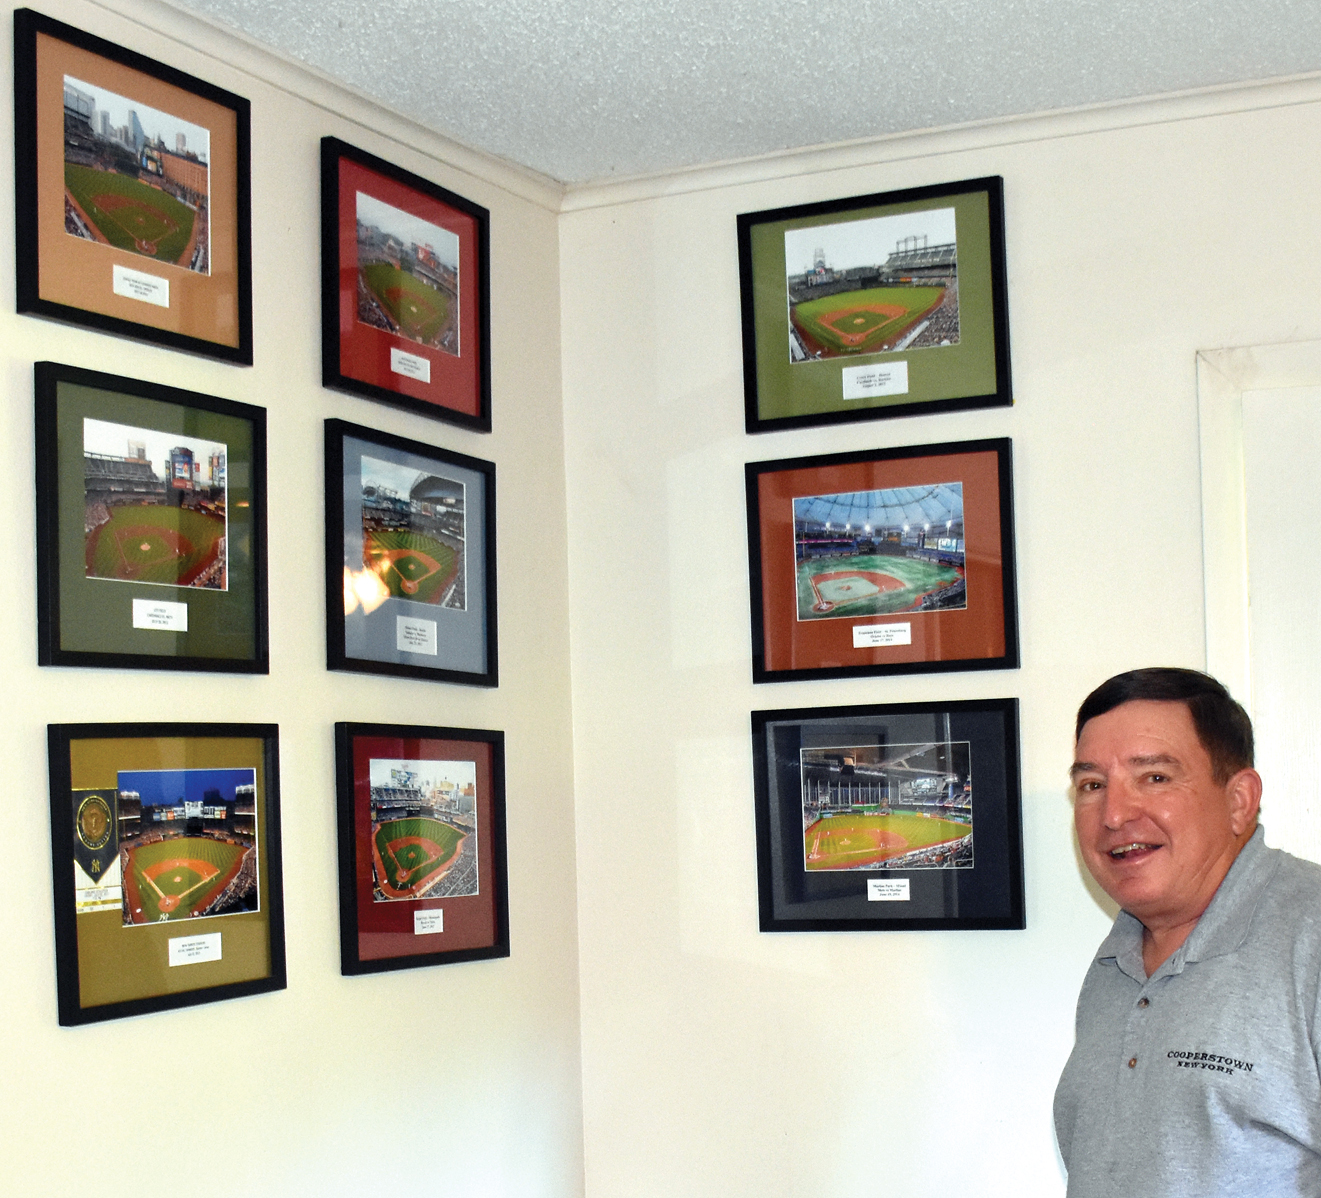 Johnny Wilson displays photos of some of the 30 MLB parks he has visited.